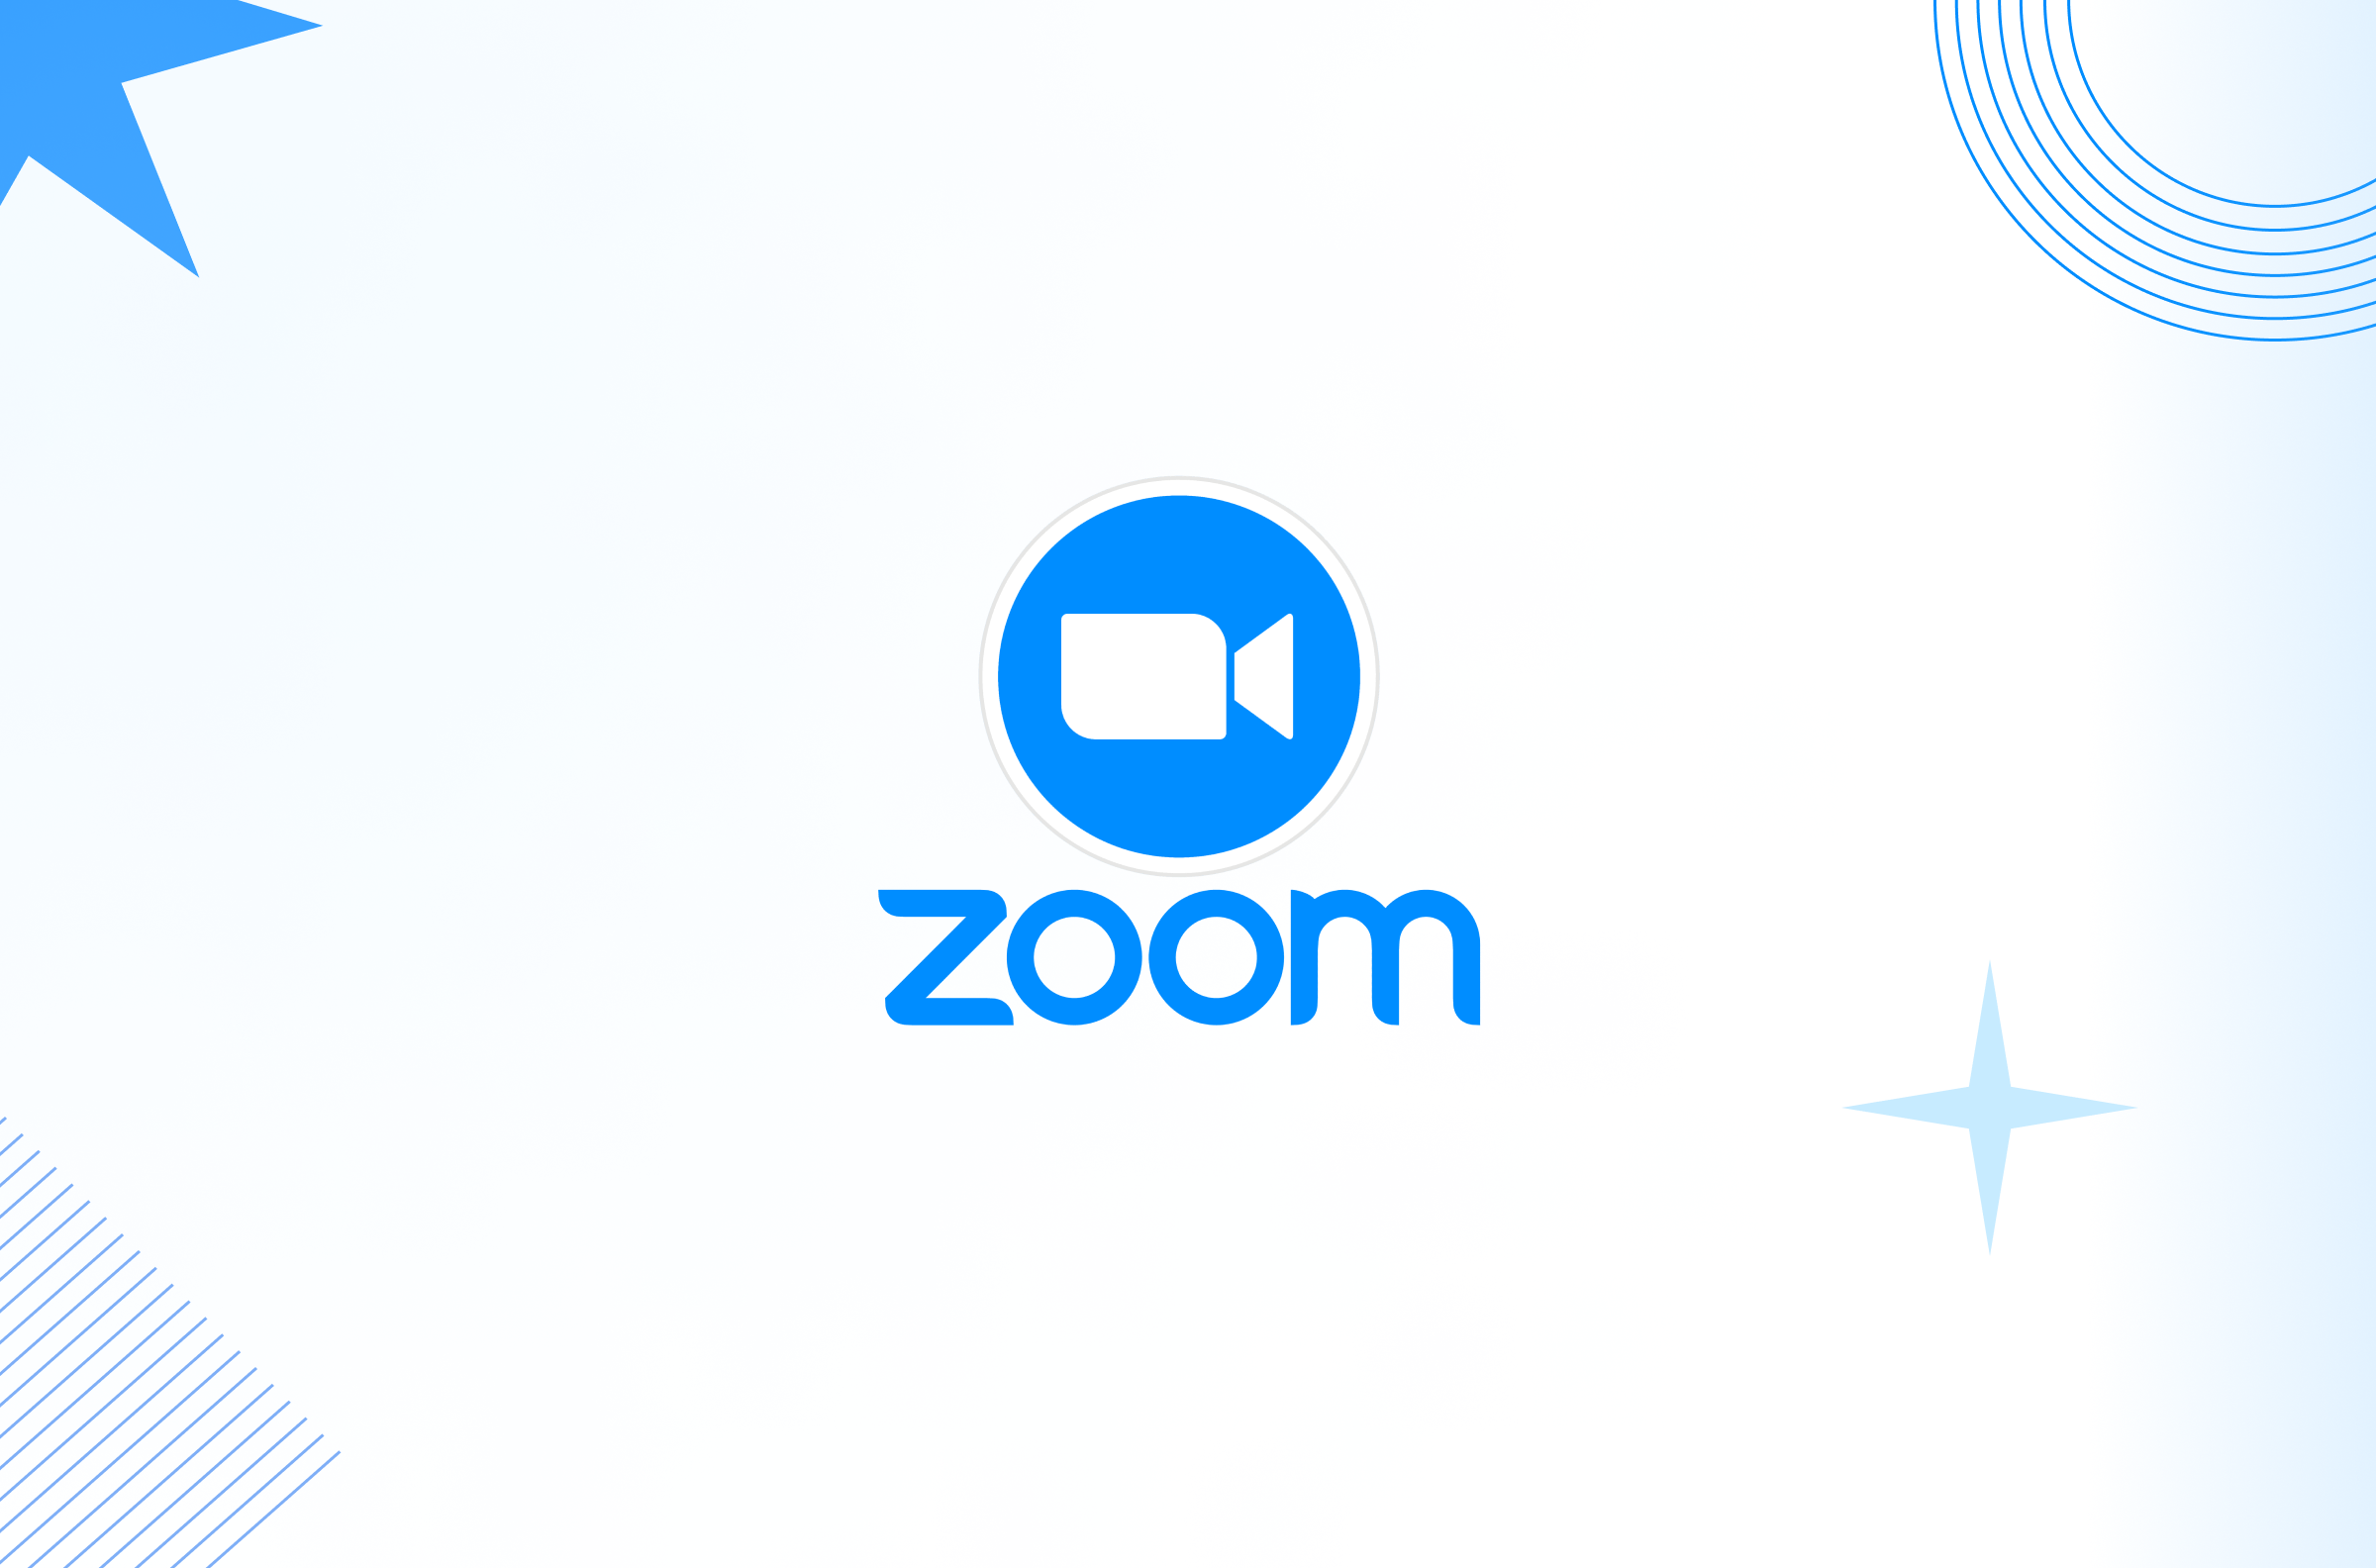 How Does Zoom Use APISIX Ingress in Its Continuous Delivery Pipeline?